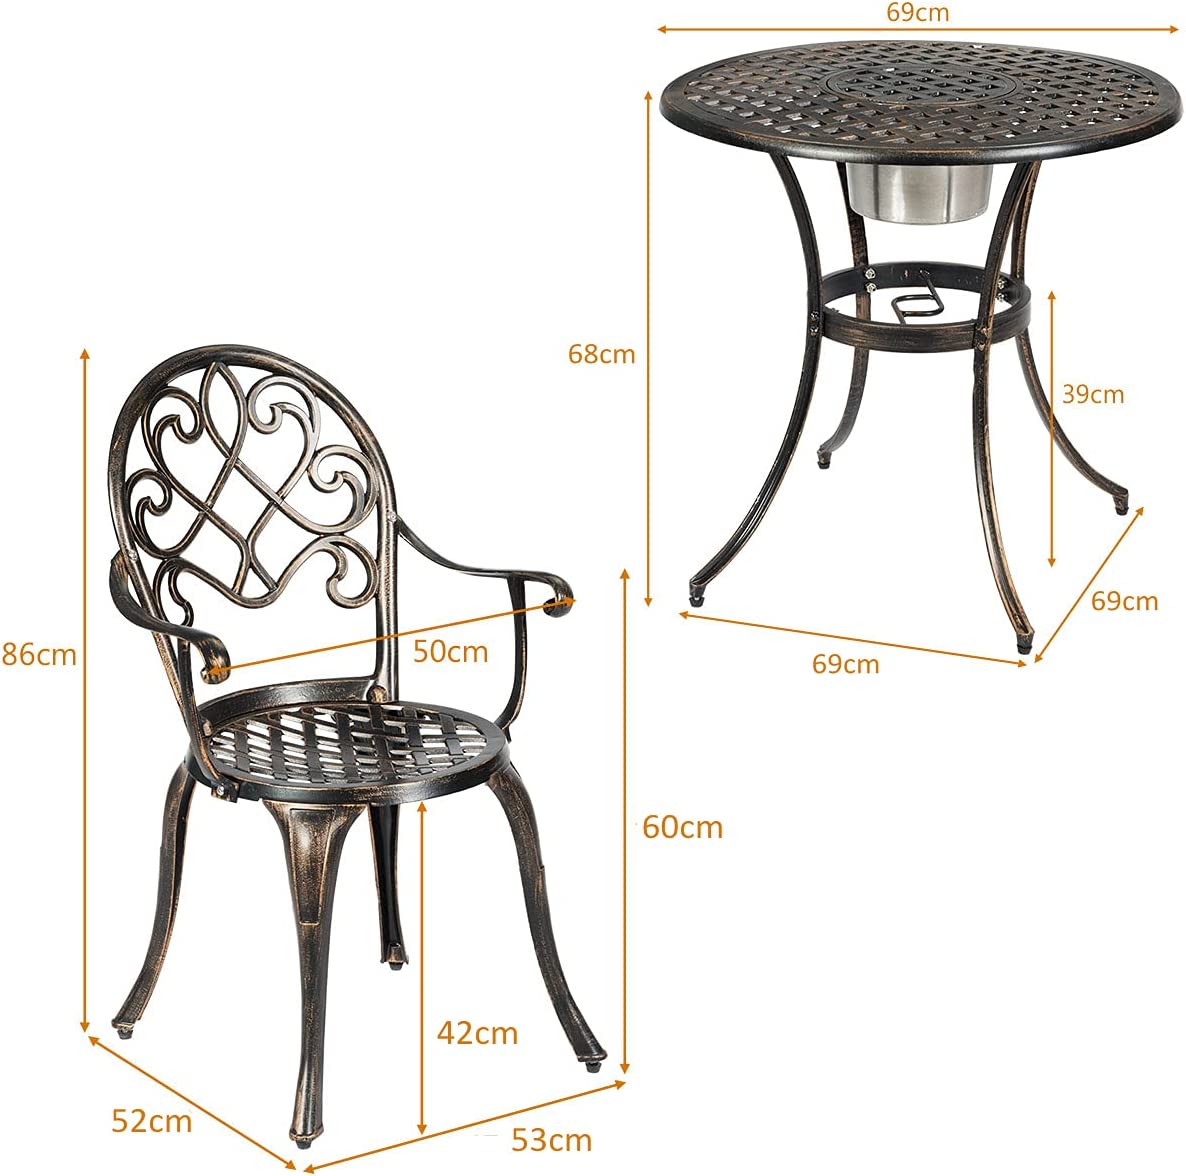 3 Piece Bistro Metal Dining Set, Garden Table and 2 Seaters